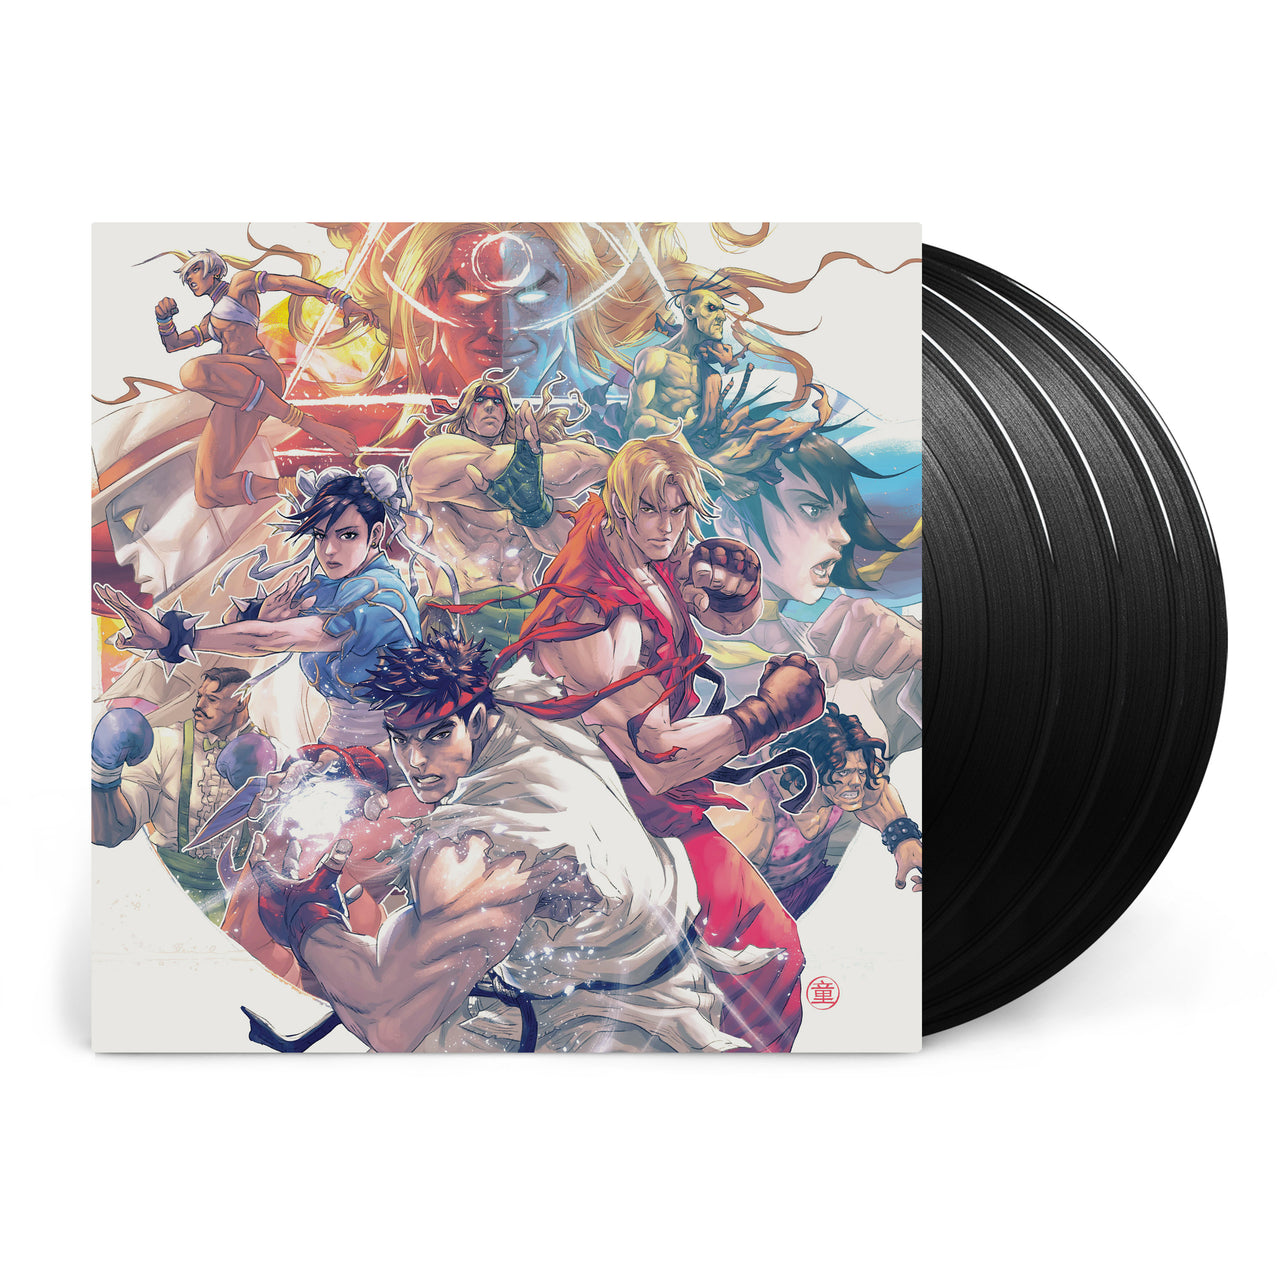 Street Fighter III: The Collection (Deluxe X4LP Boxset)